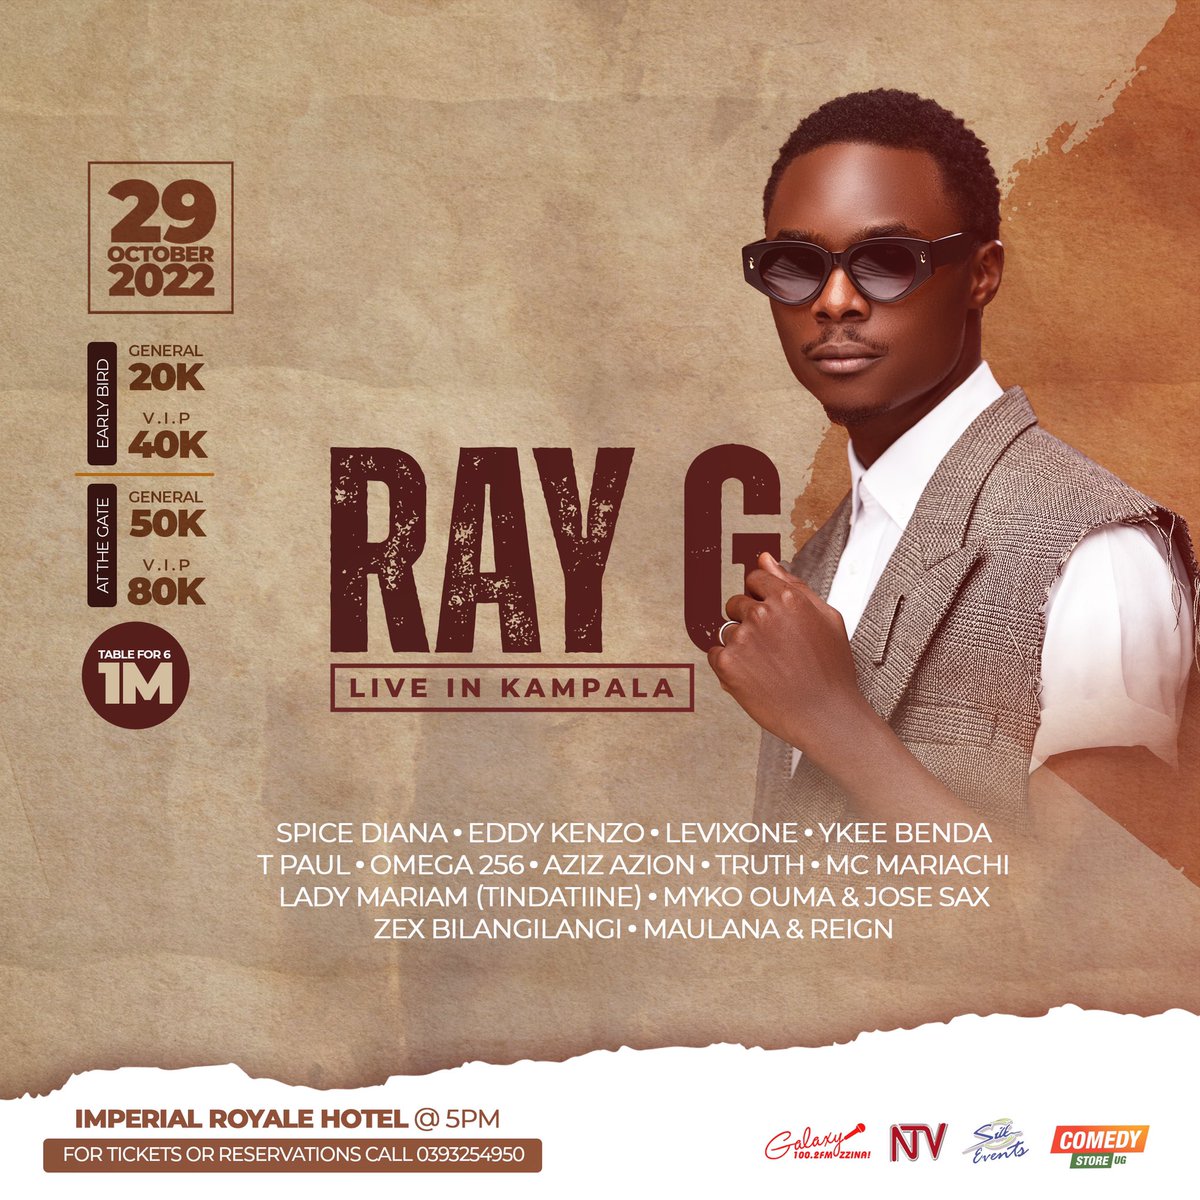 Let's support the king of Western. Mark the date. @Ray_G_official